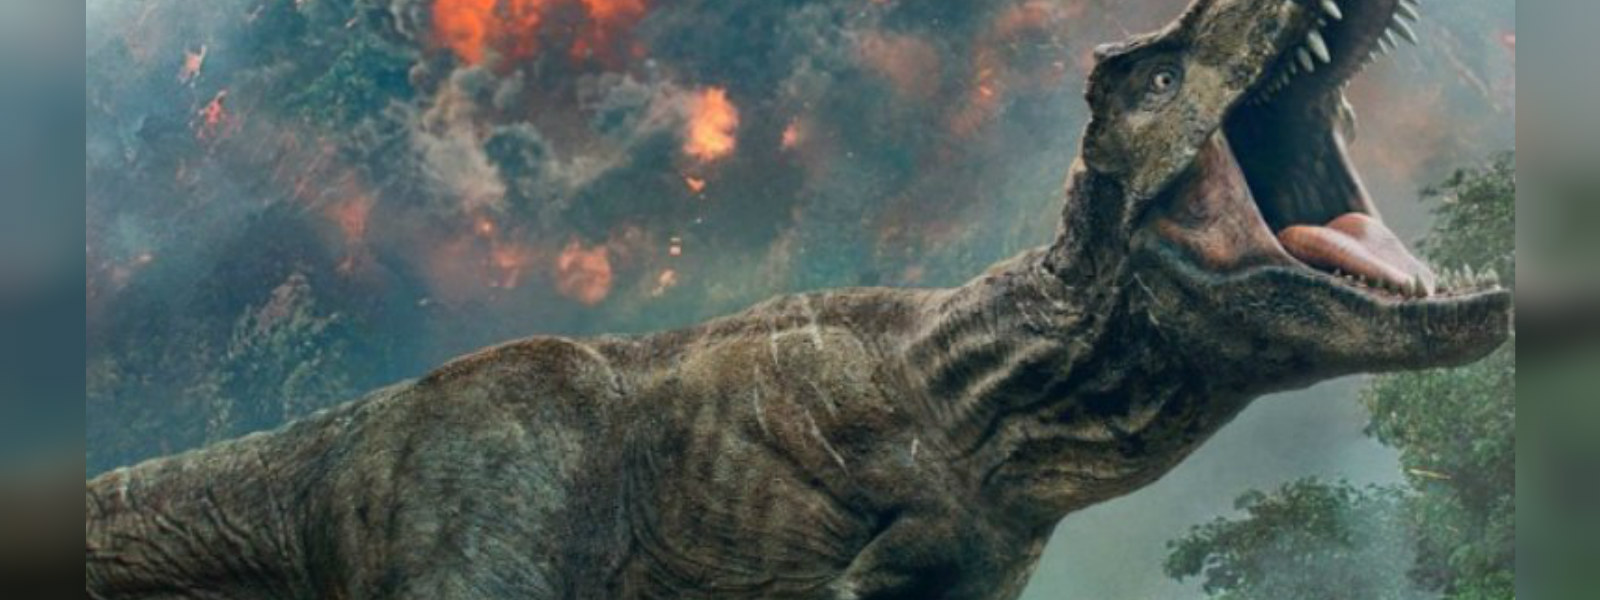 Jurassic world sequel expected to top box office